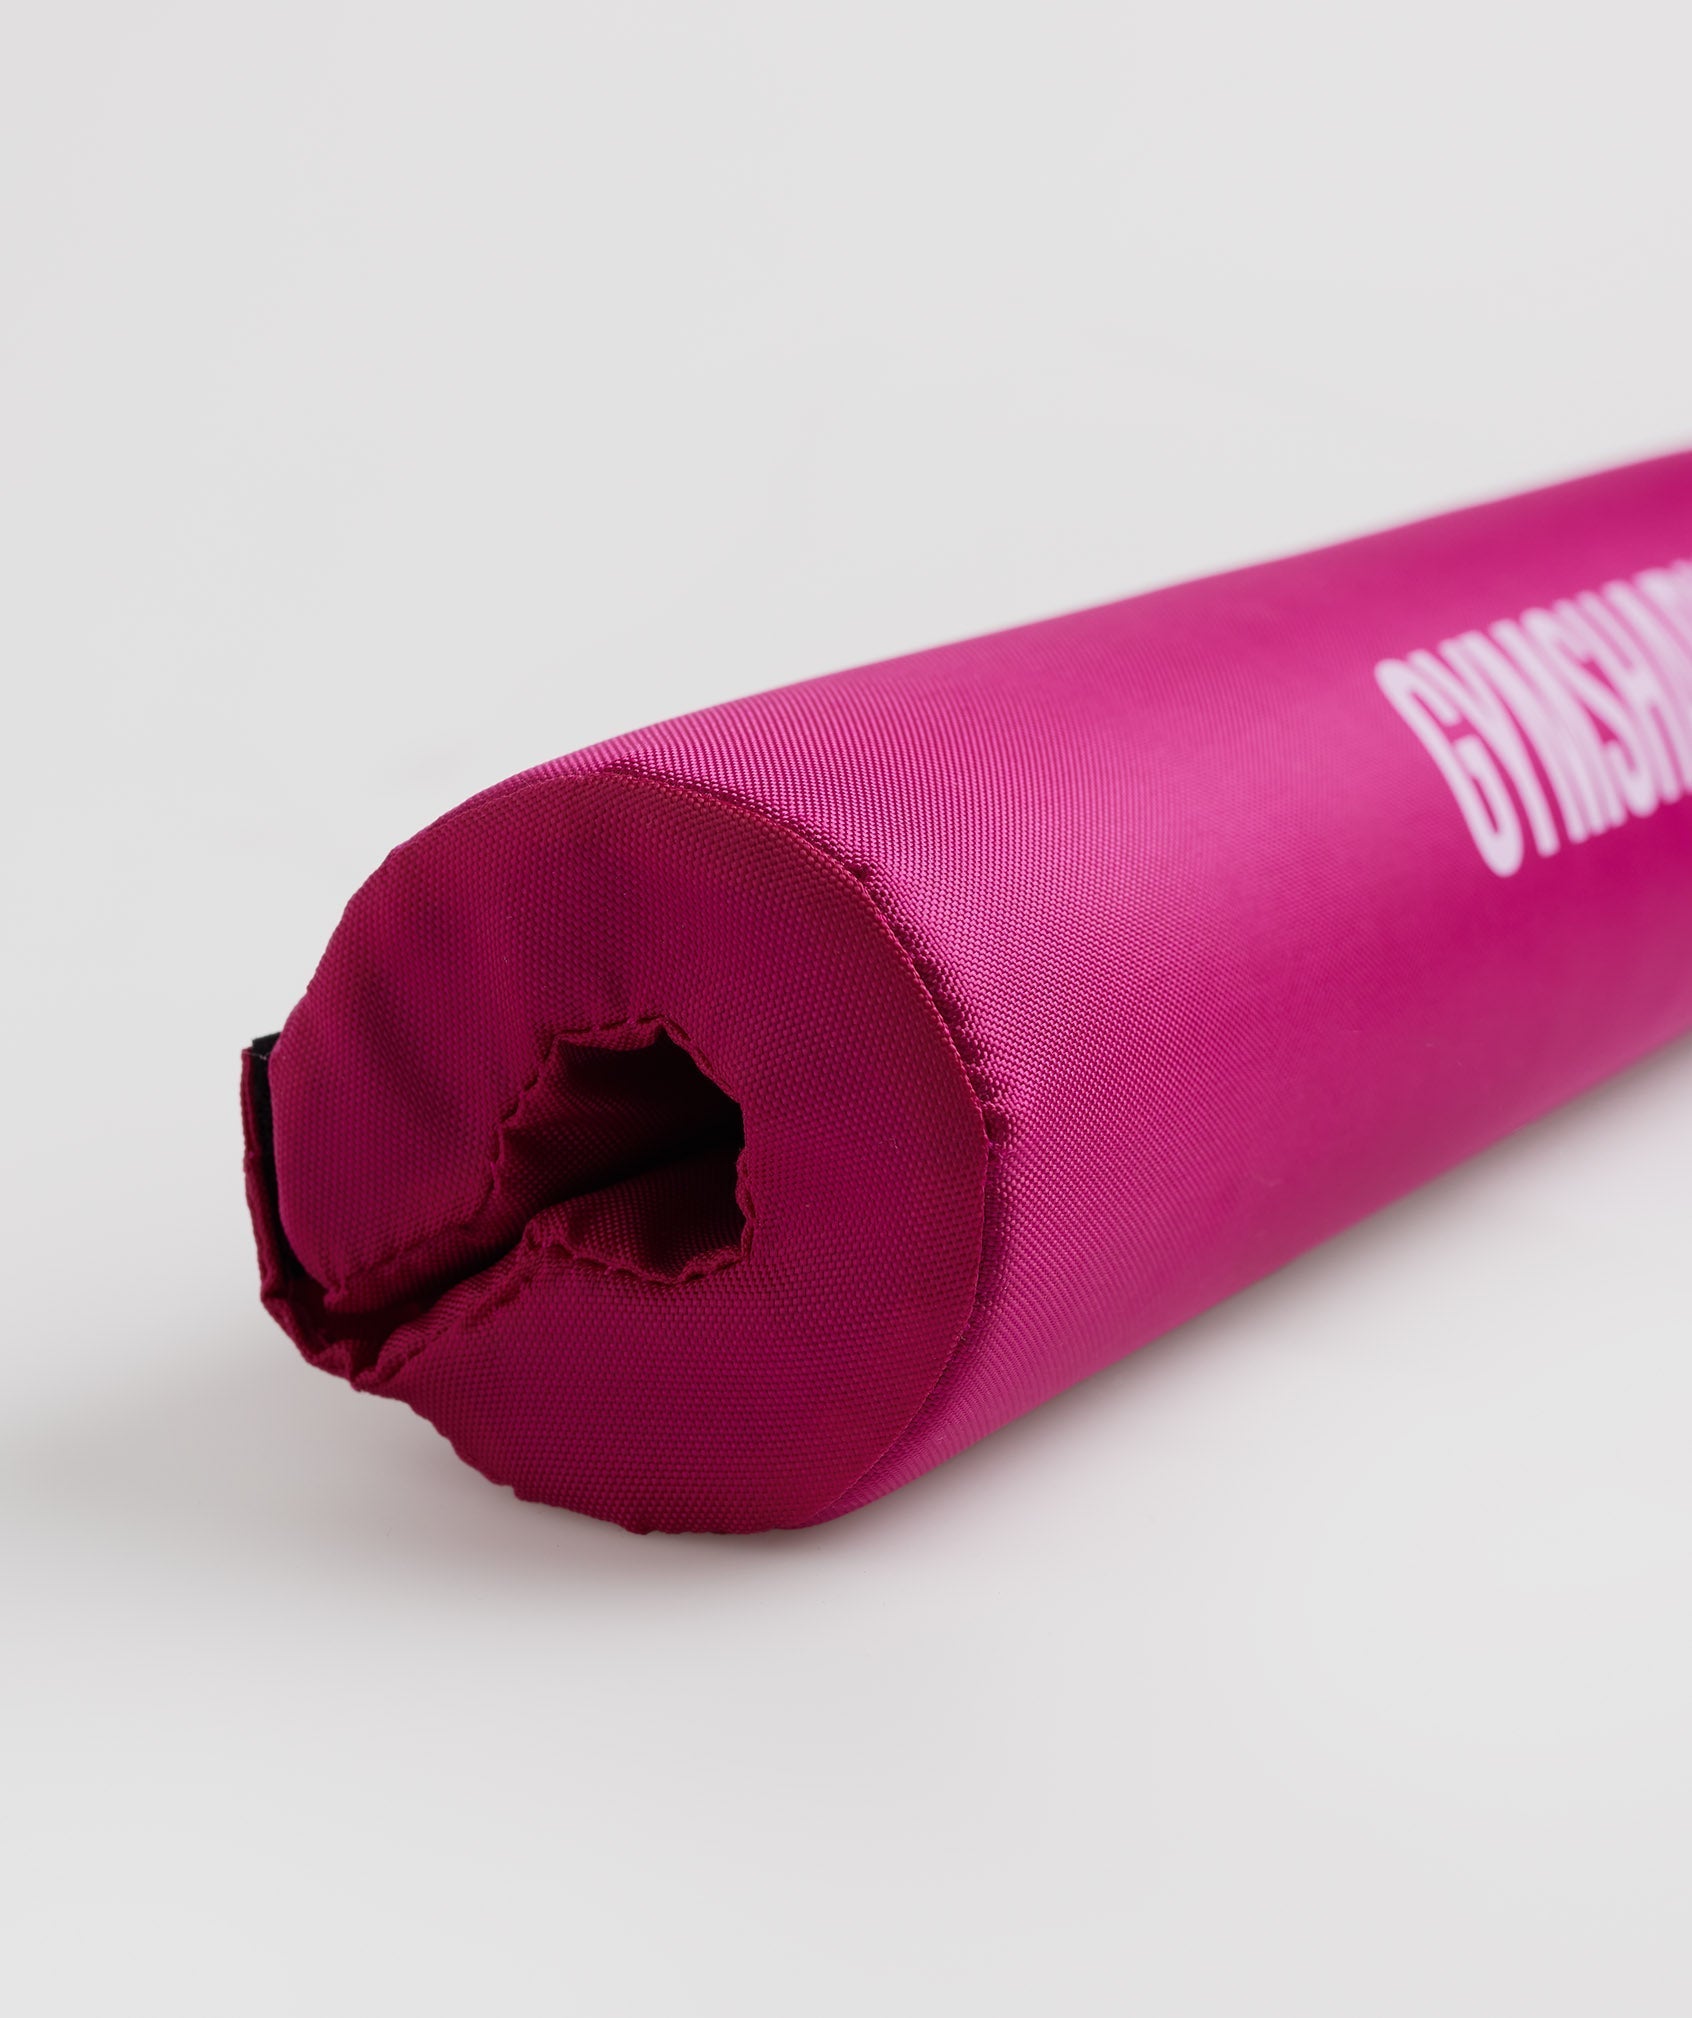 Barbell Pad in Magenta Pink